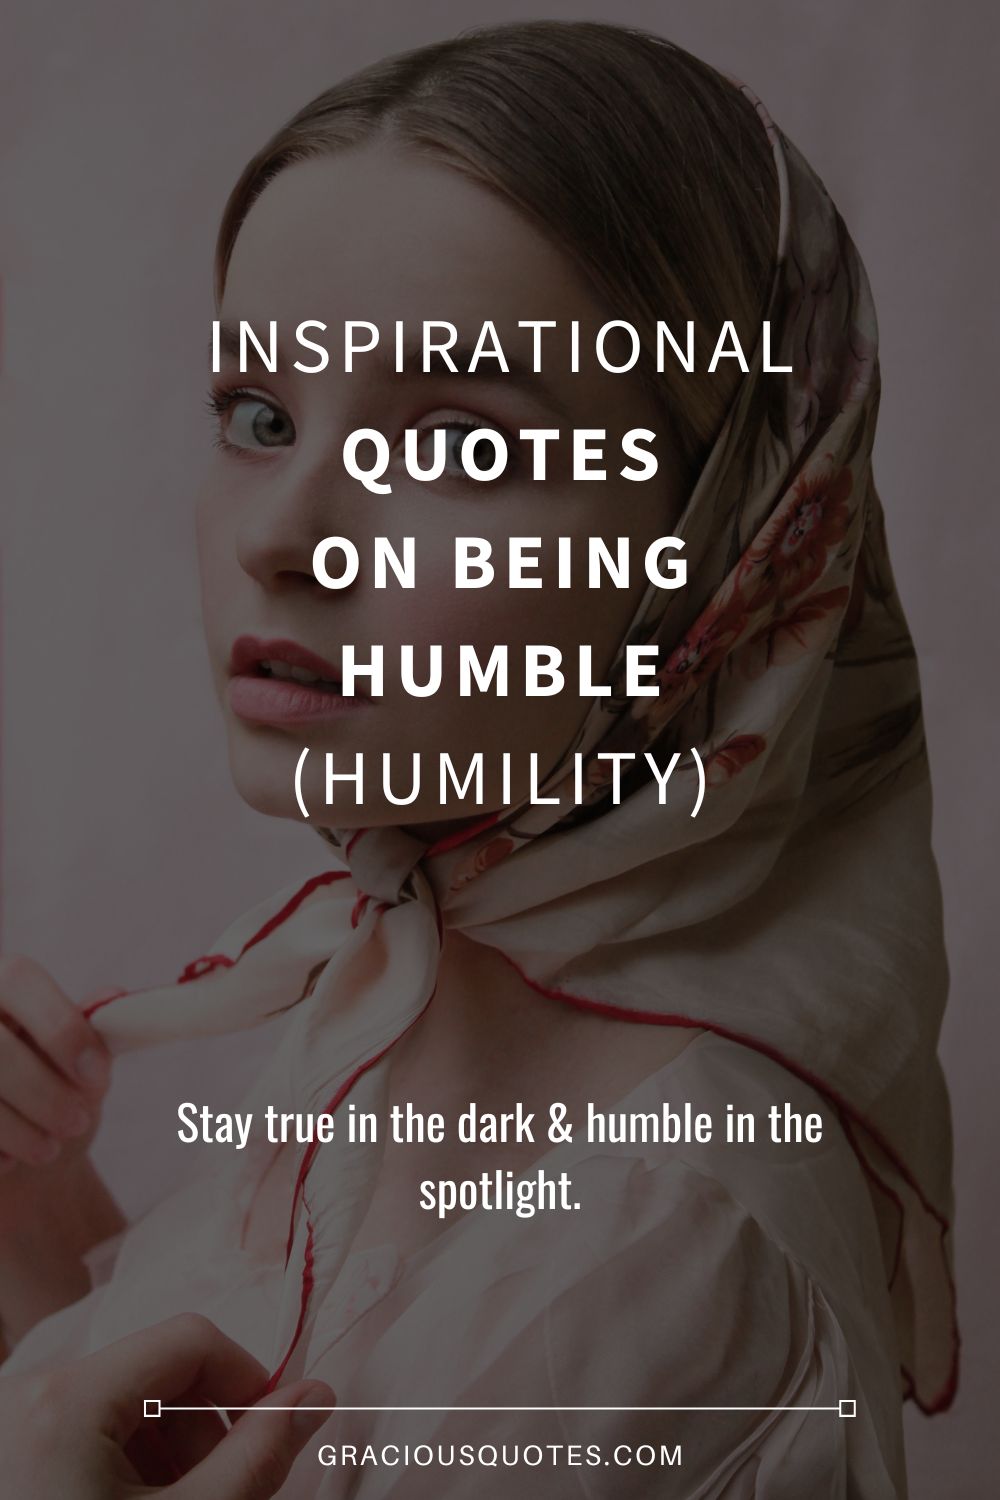 Inspirational Quotes on Being Humble (HUMILITY) - Gracious Quotes